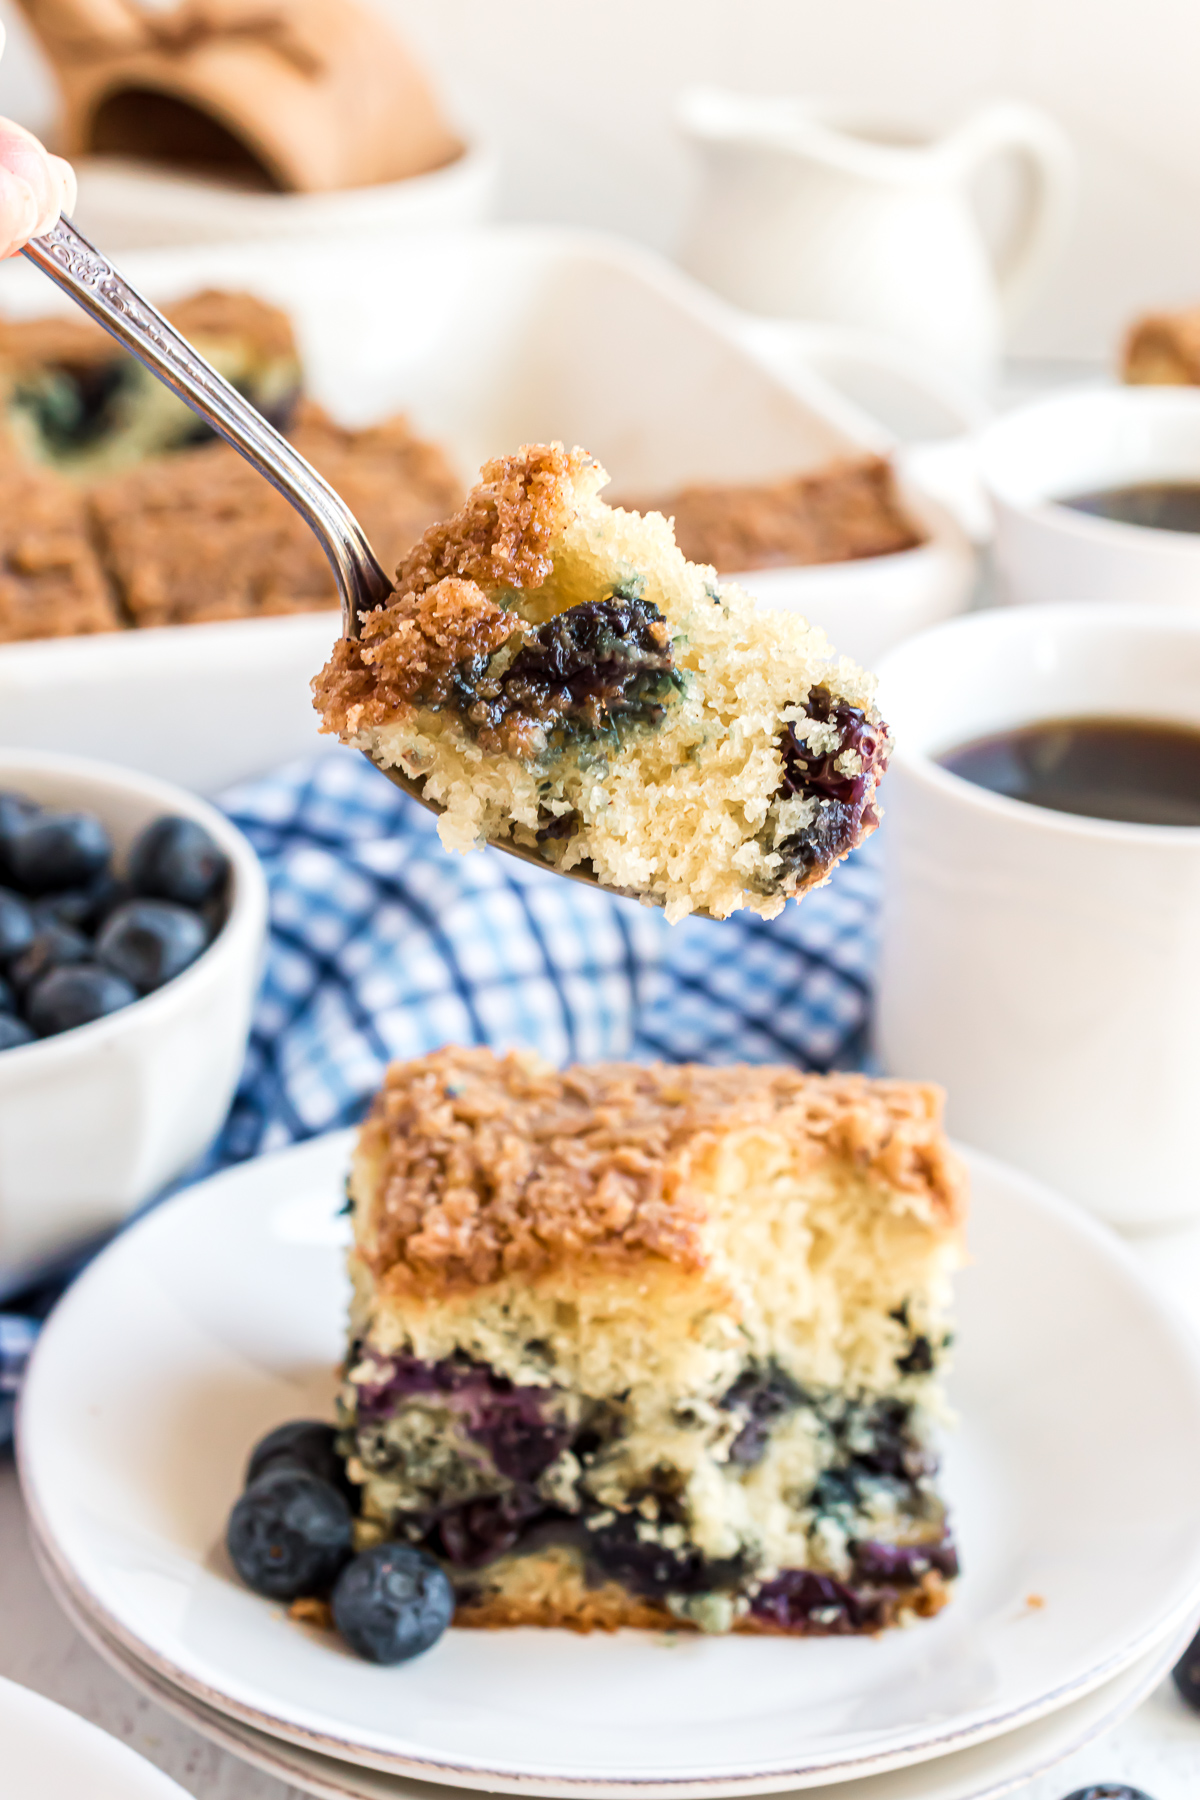 A bite of the blueberry coffee cake on a fork with the cake piece shown below the bite and two cups of coffee in the background.